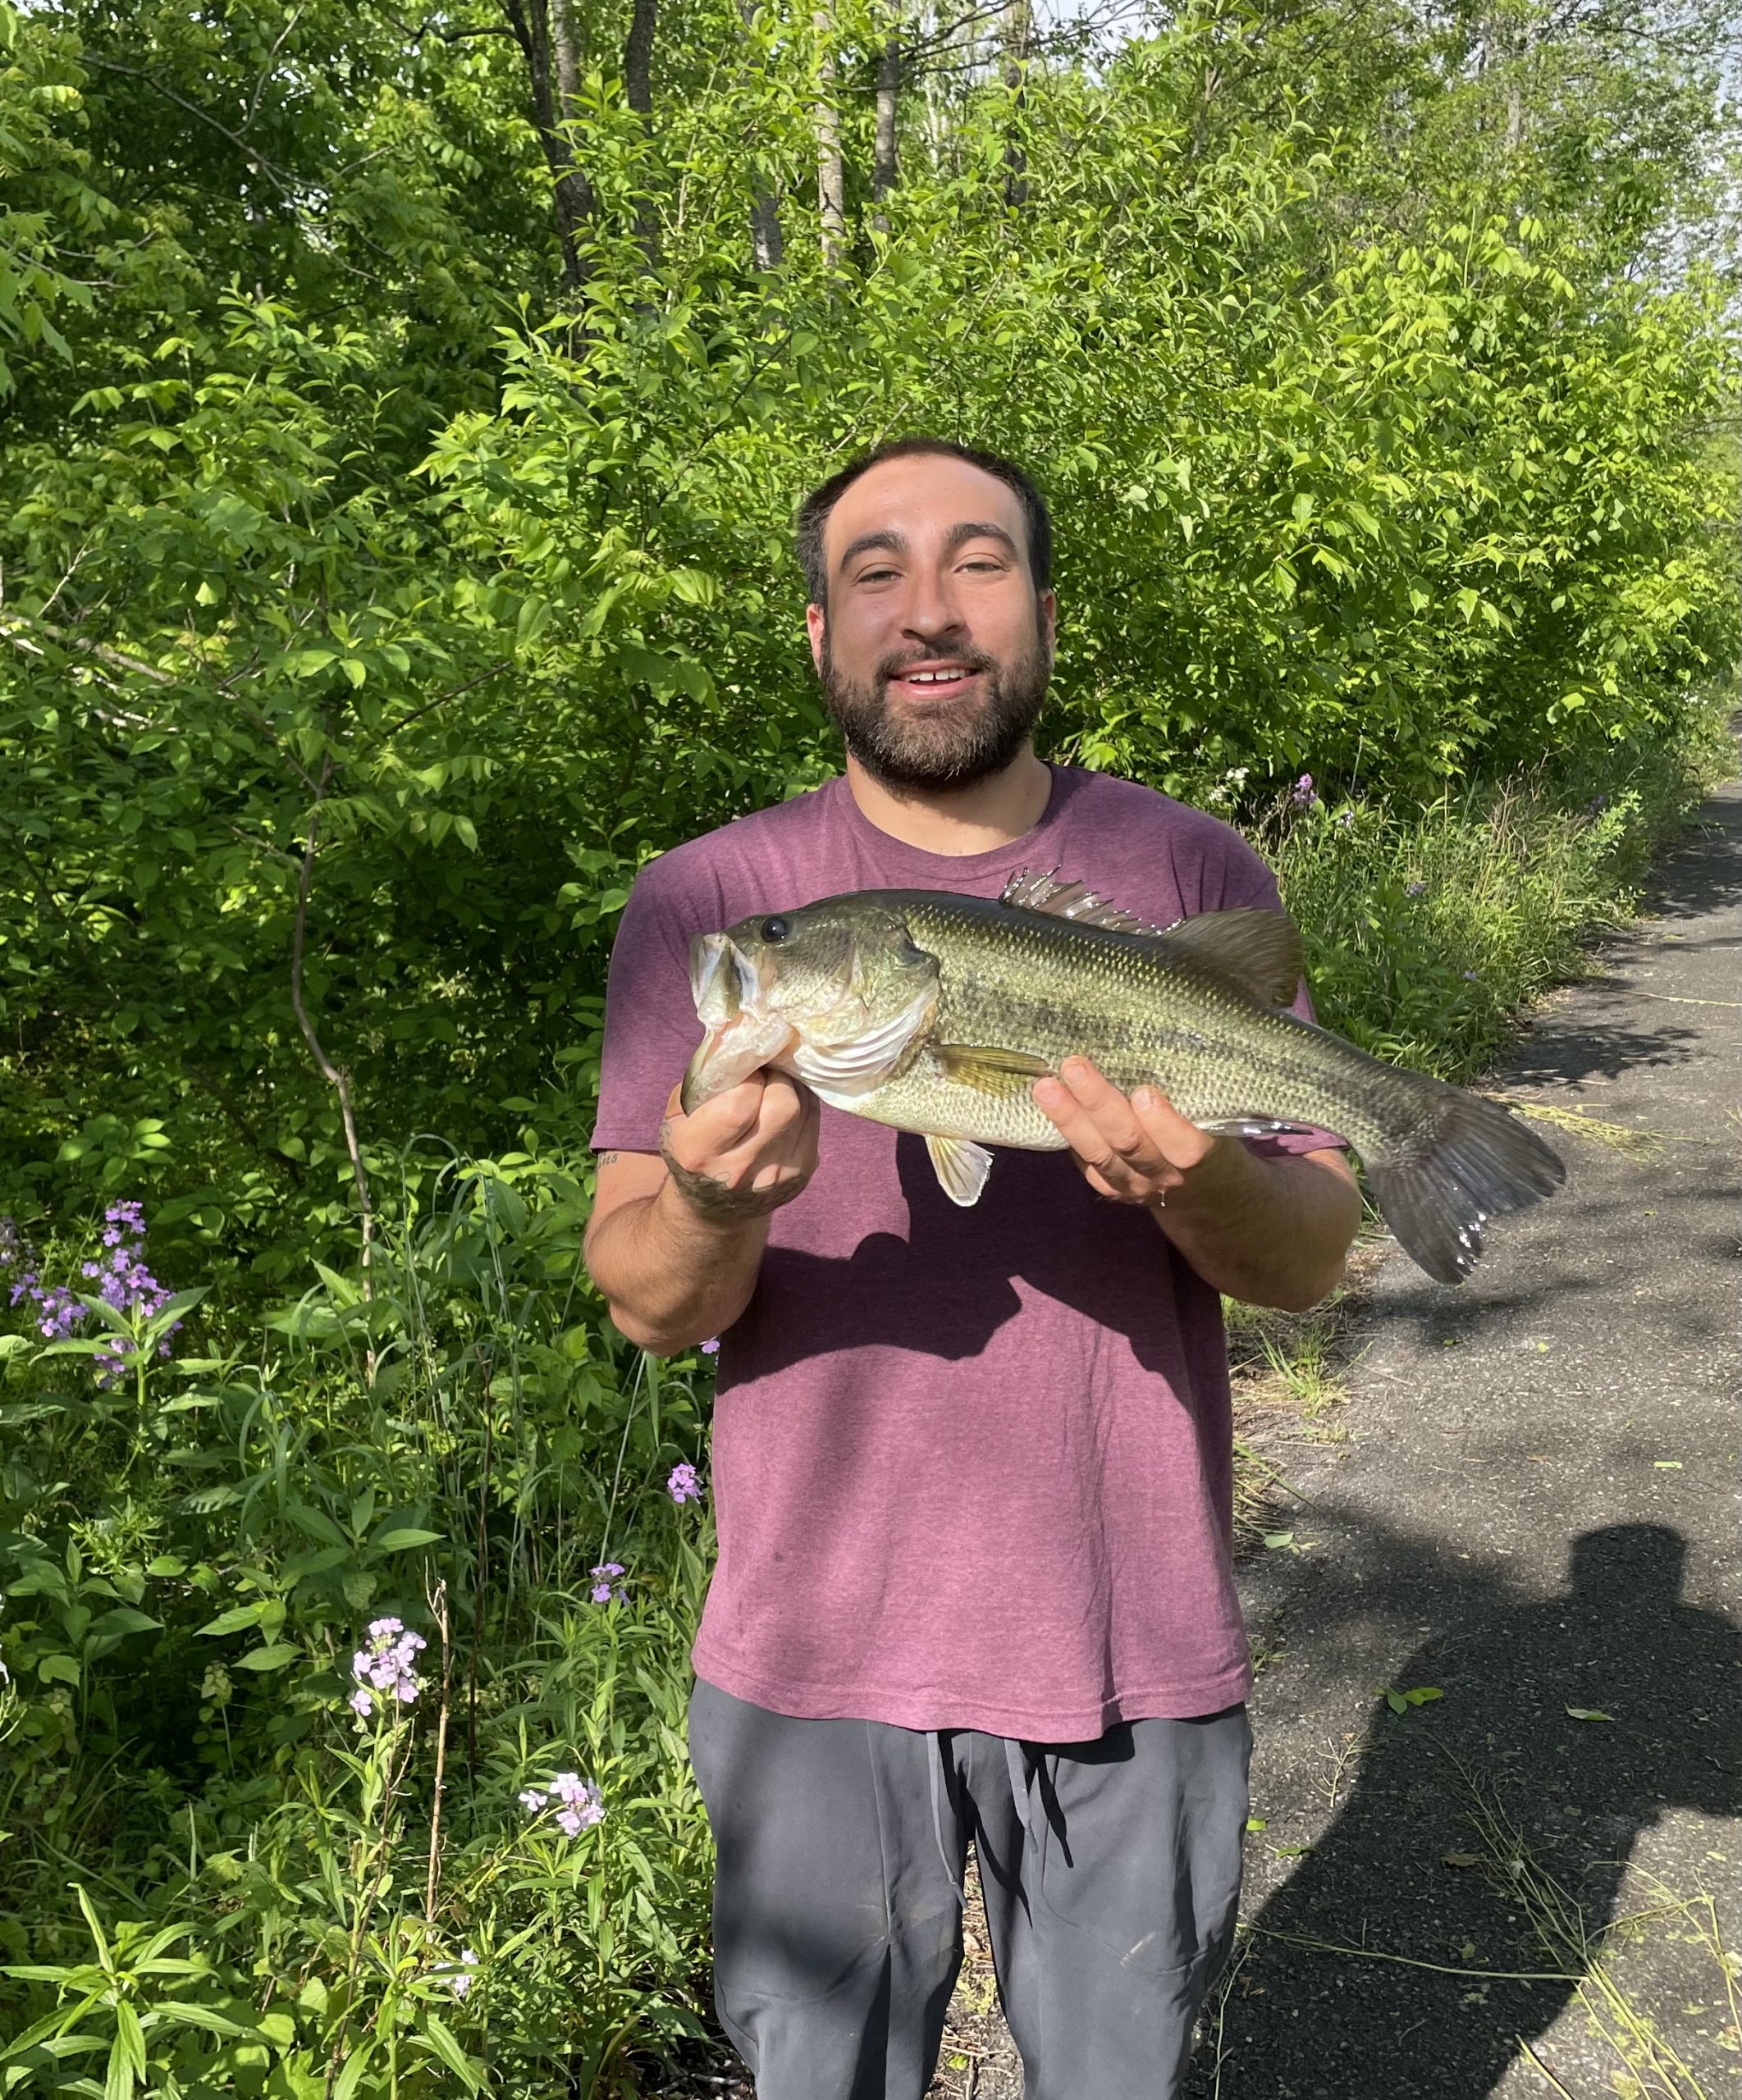 maumee river report-23 may 2022